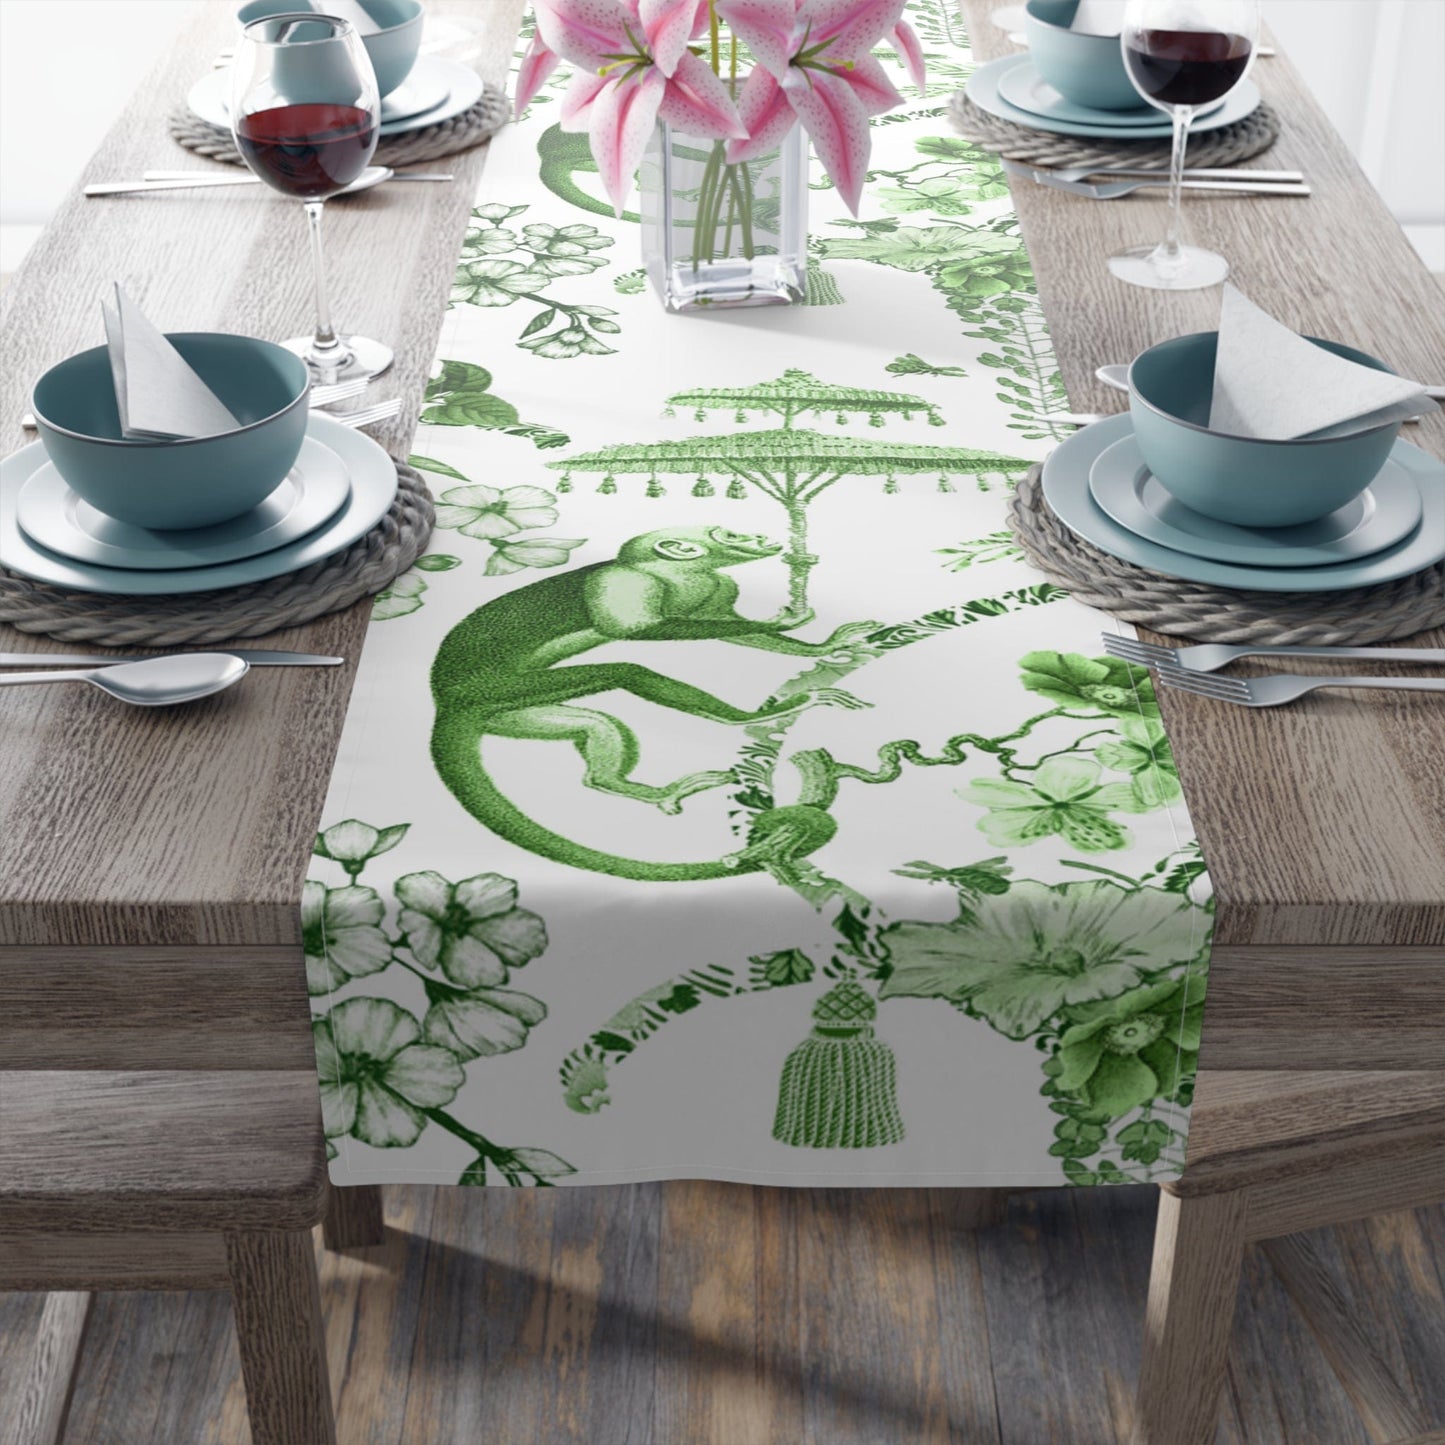 Printify Chinoiserie Botanical Toile Table Runner, Floral Green, White Chinoiserie Jungle, Country Farmhouse Grandmillenial Table Decor Home Decor 16" × 90" / Cotton Twill 33300911032699350133